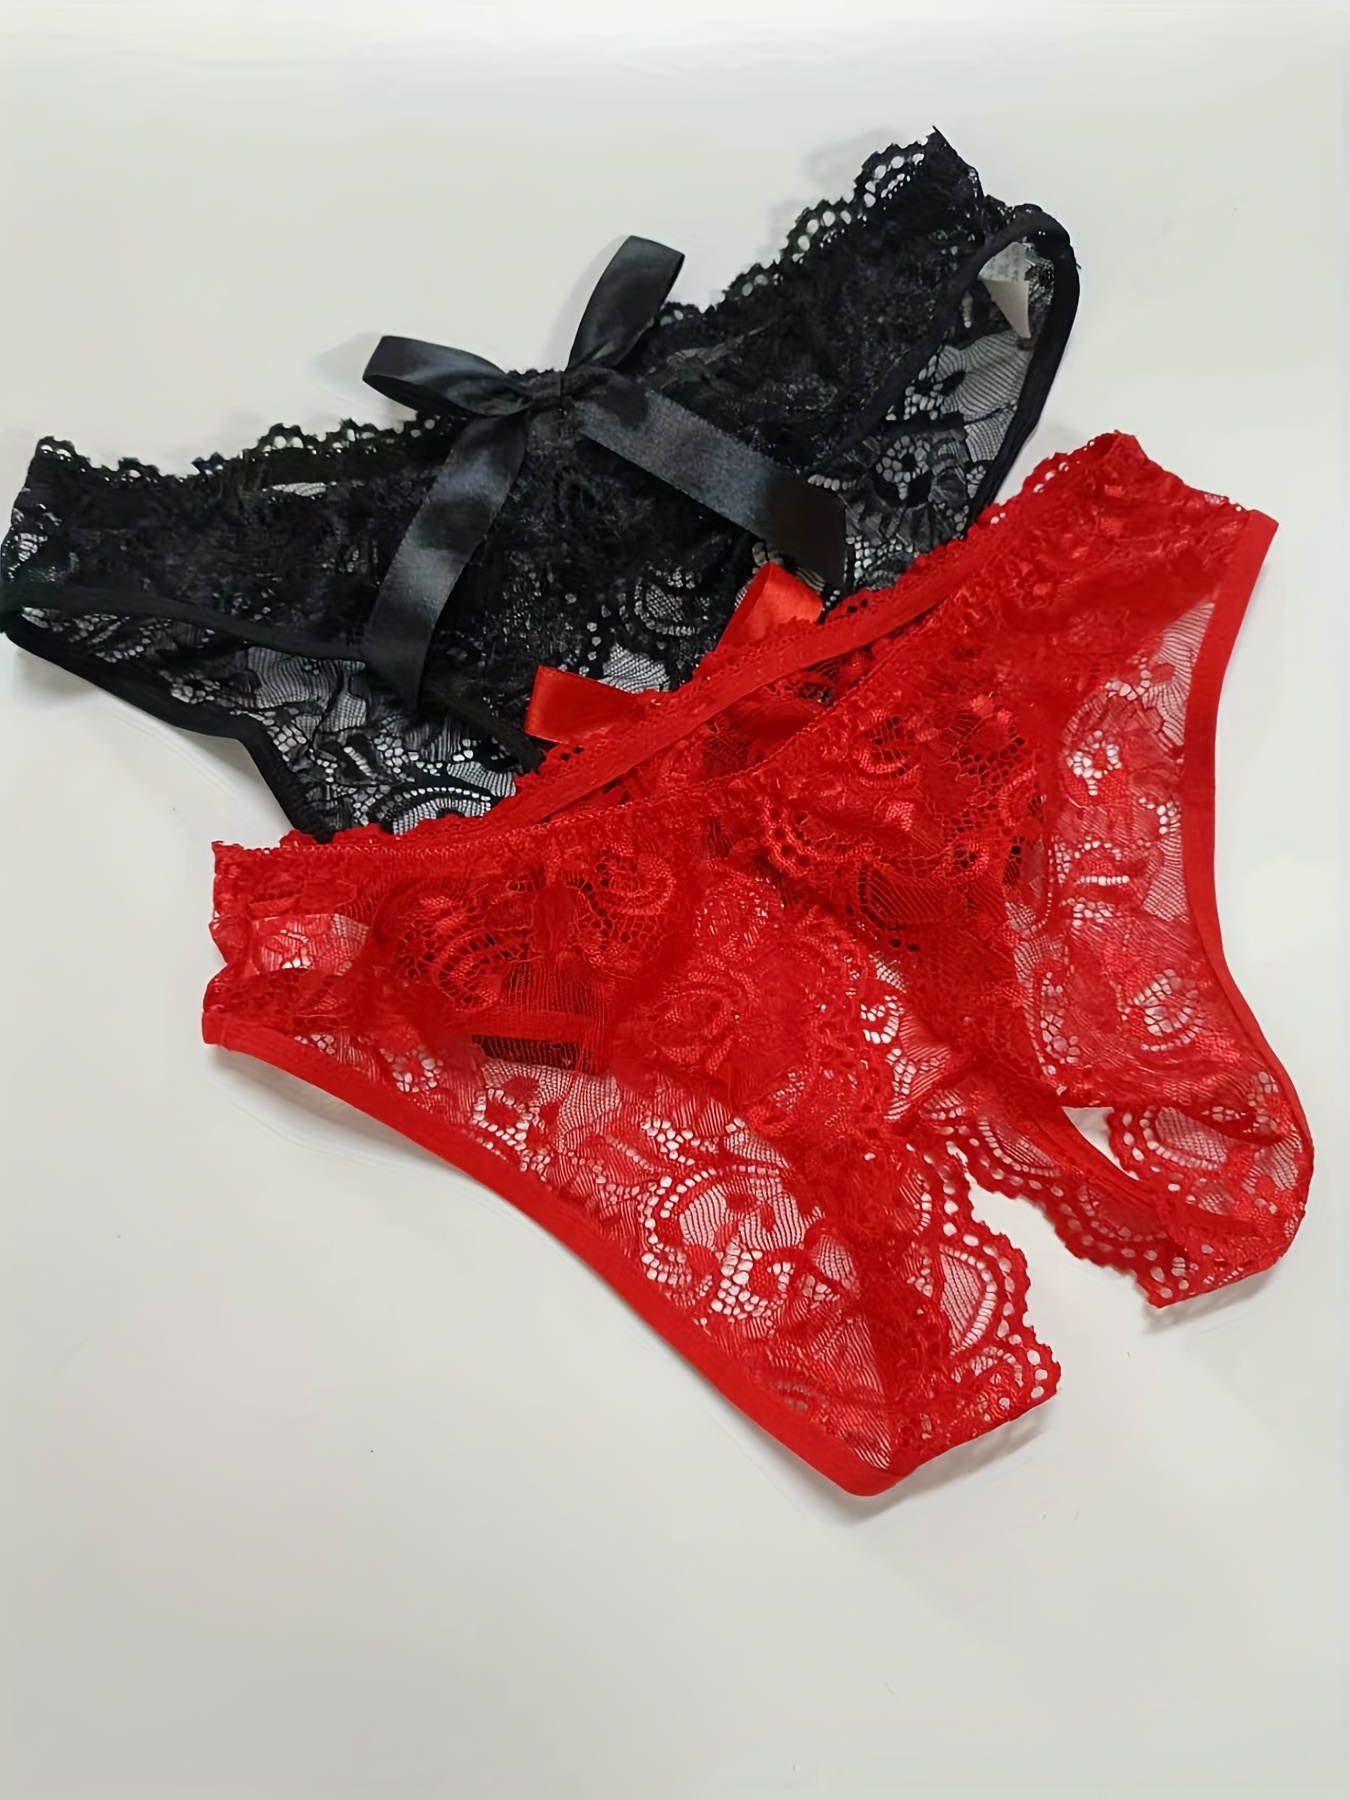 Women's Lace Underwear - Briefs, Thongs, G-String - Open Crotch Panties in  Multiple Colors